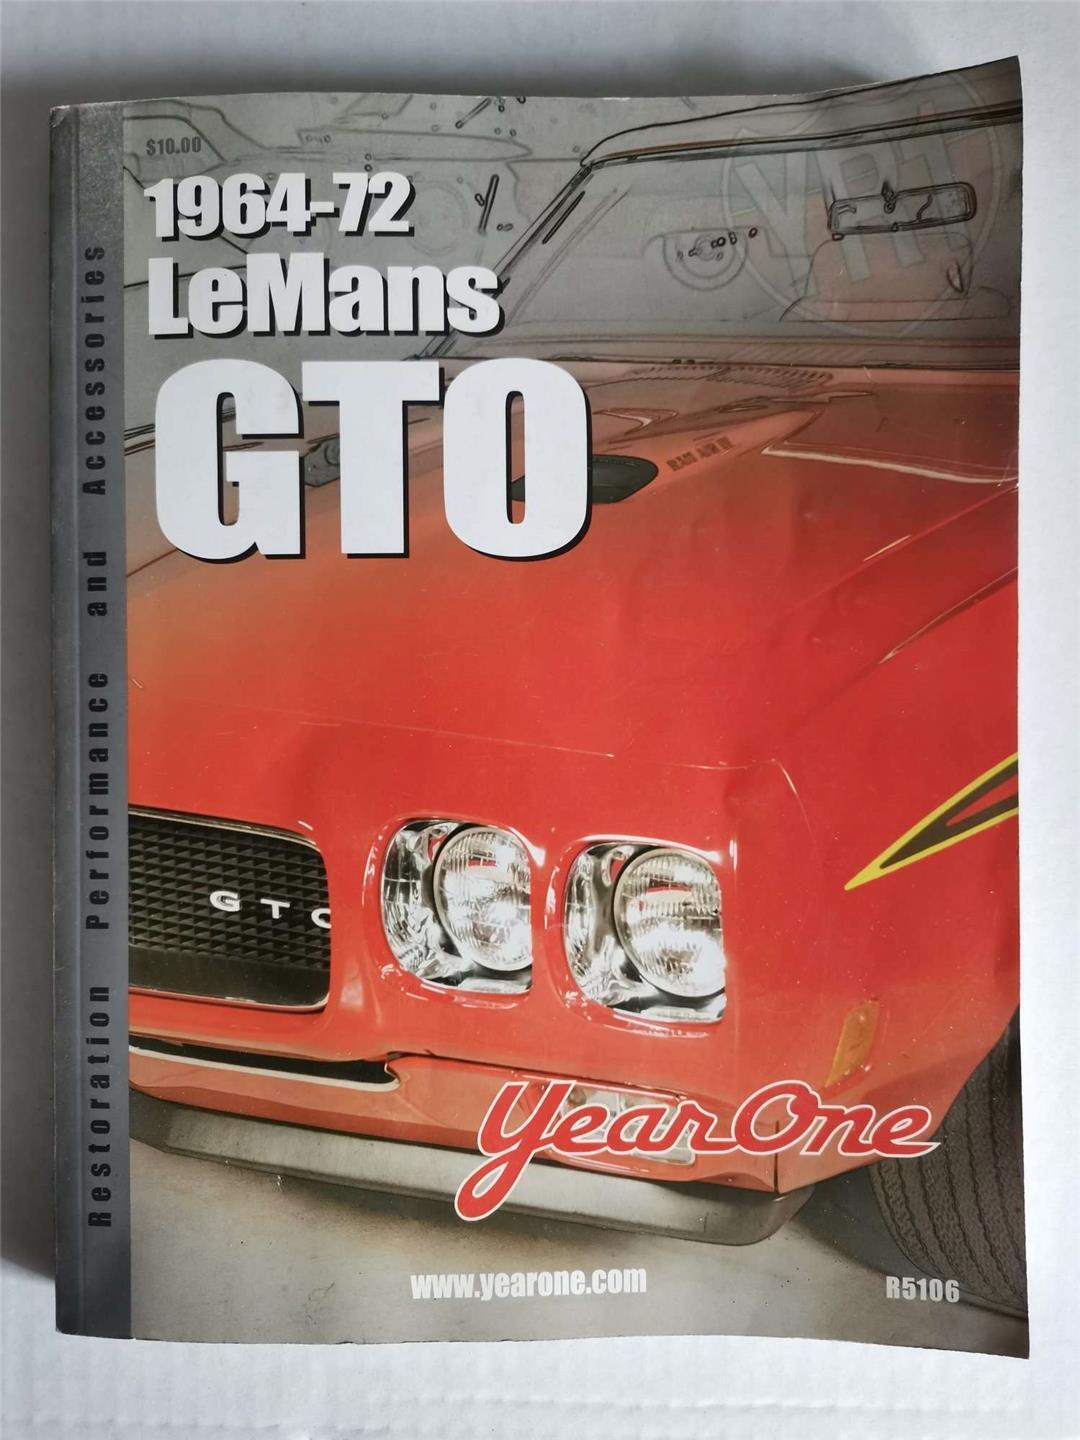 1964-72 LeMans GTO Year One Restoration and Accesories Book...384 pages